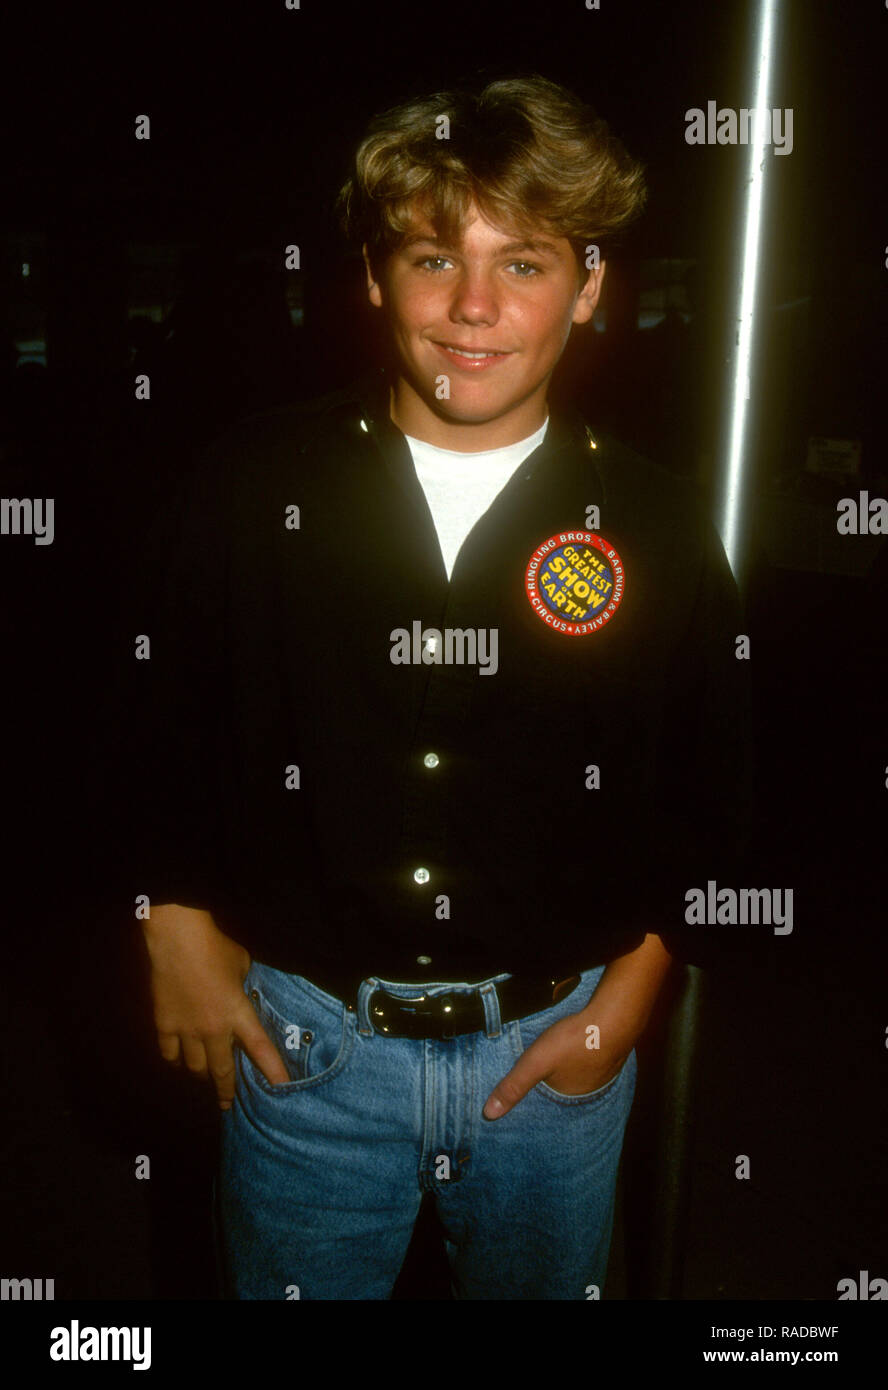 LOS ANGELES, CA - JULY 22: Actor Jason James Richter attends Ringling Brothers Barnum and Bailey Circus on July 22, 1993 at the Los Angeles Sports Arena in Los Angeles, California. Photo by Barry King/Alamy Stock Photo Stock Photo